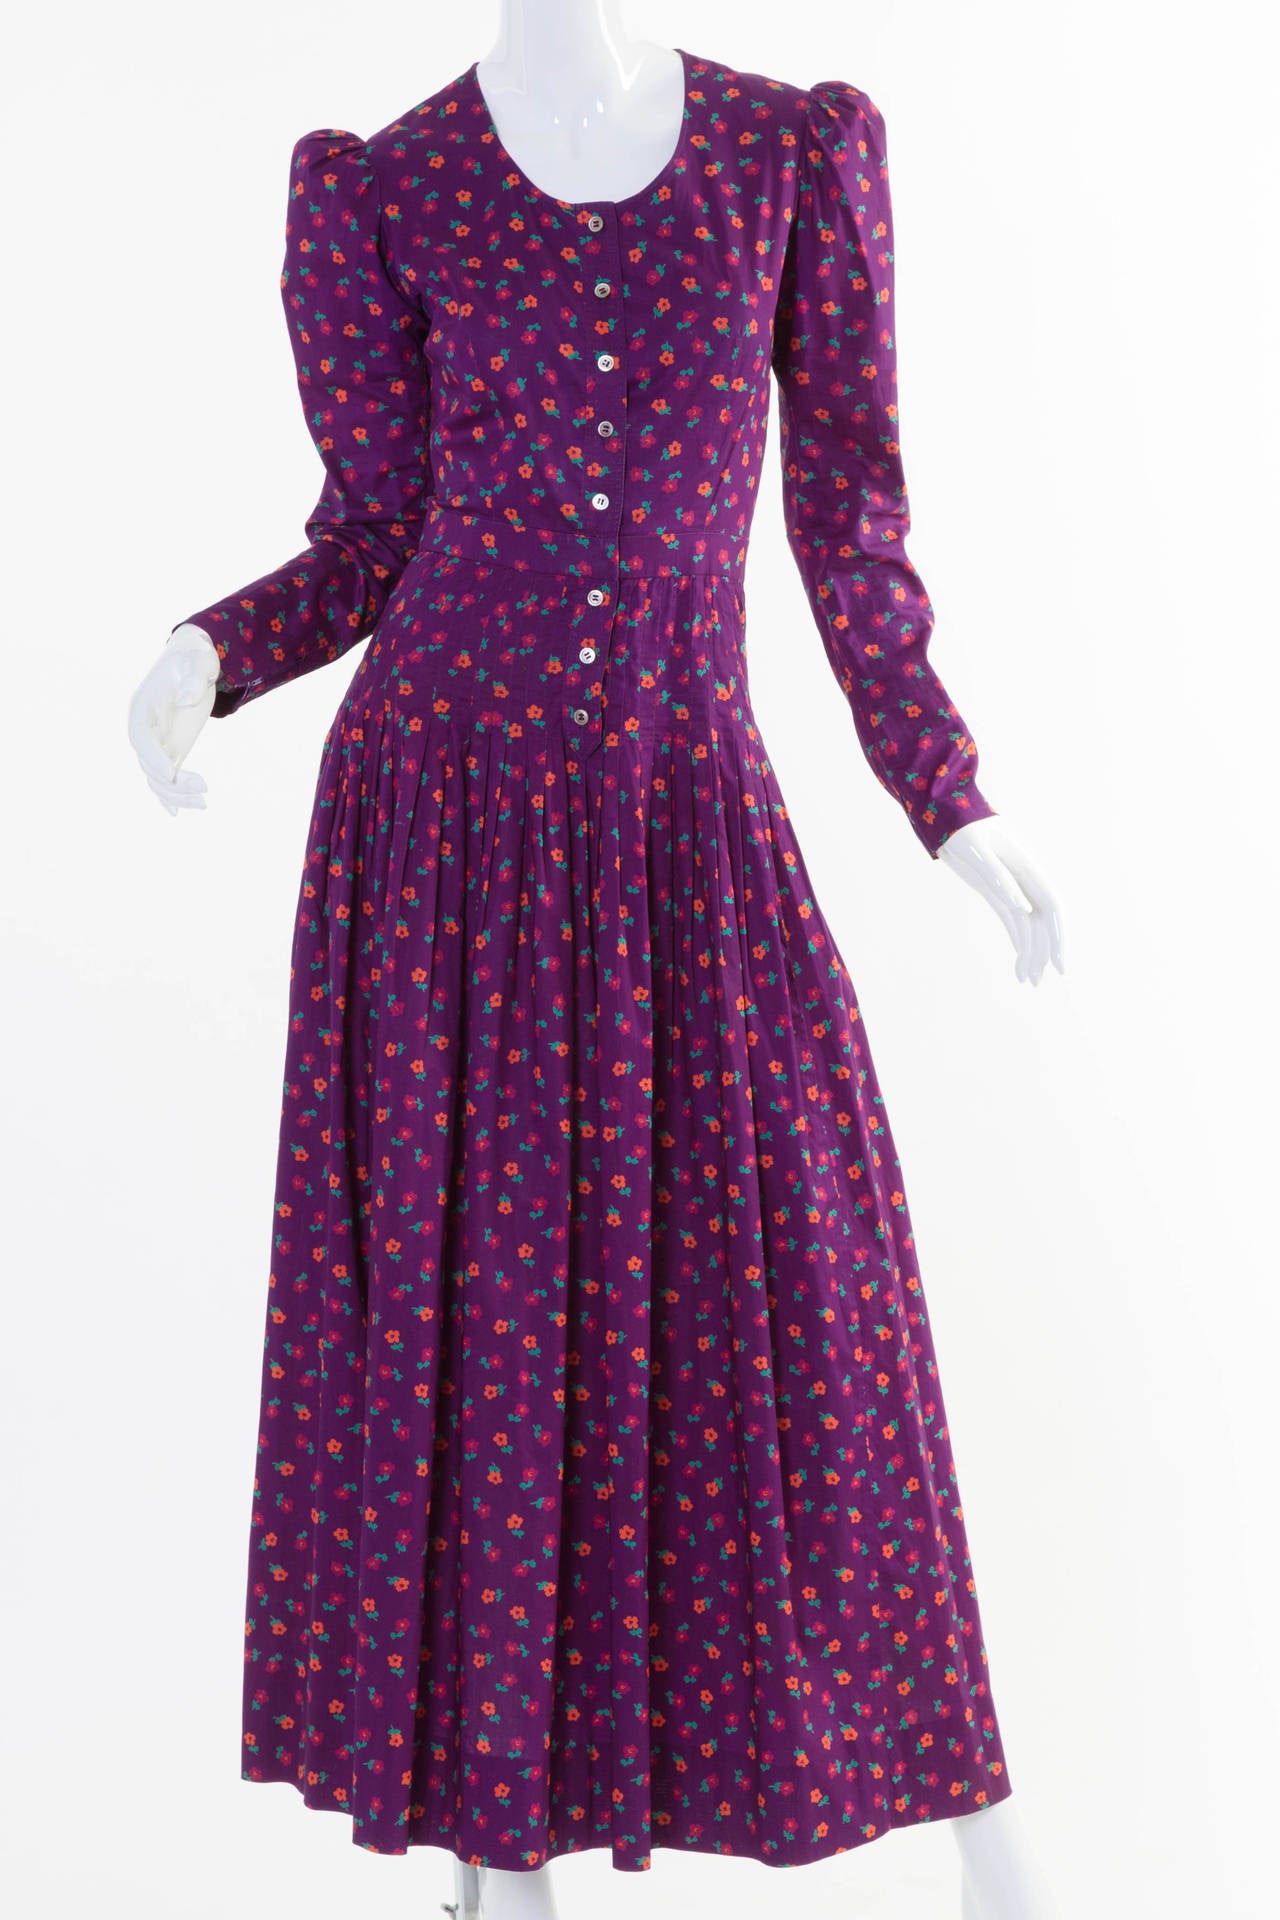 Vintage 1970s Yves Saint Laurent Rive Gauche gypsy style dress in very fine lightweight cotton with the smoothest finish in a deep plum or with floral sprigs in orange, cranberry, and green.
The purple color of this dress photographed slightly